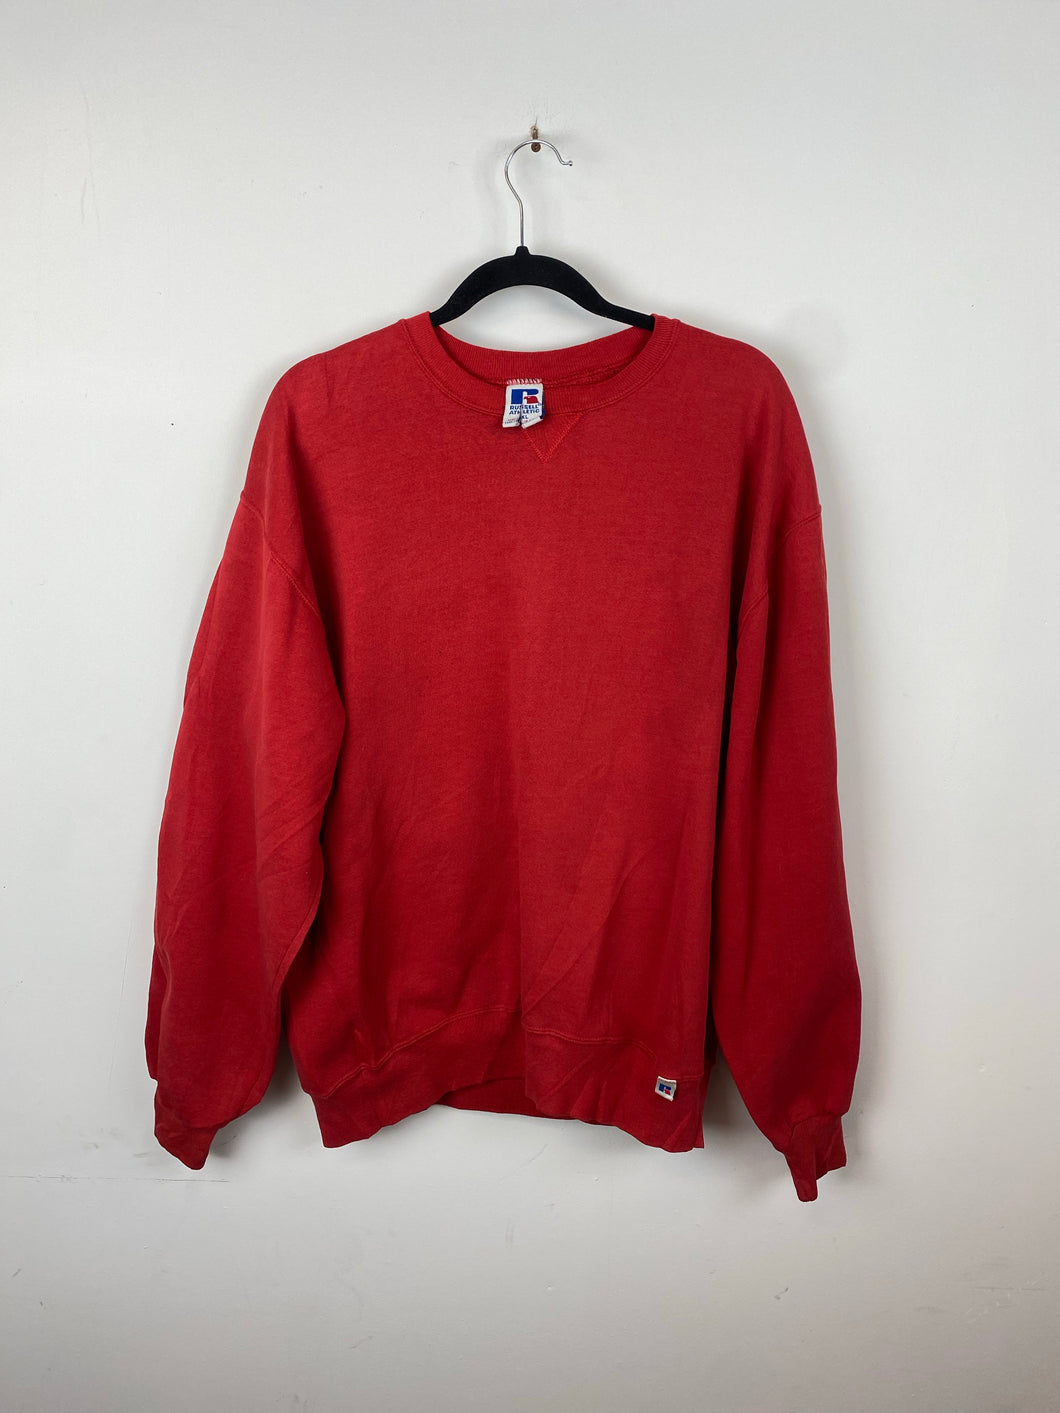 Blood orange Russell crewneck made in USA